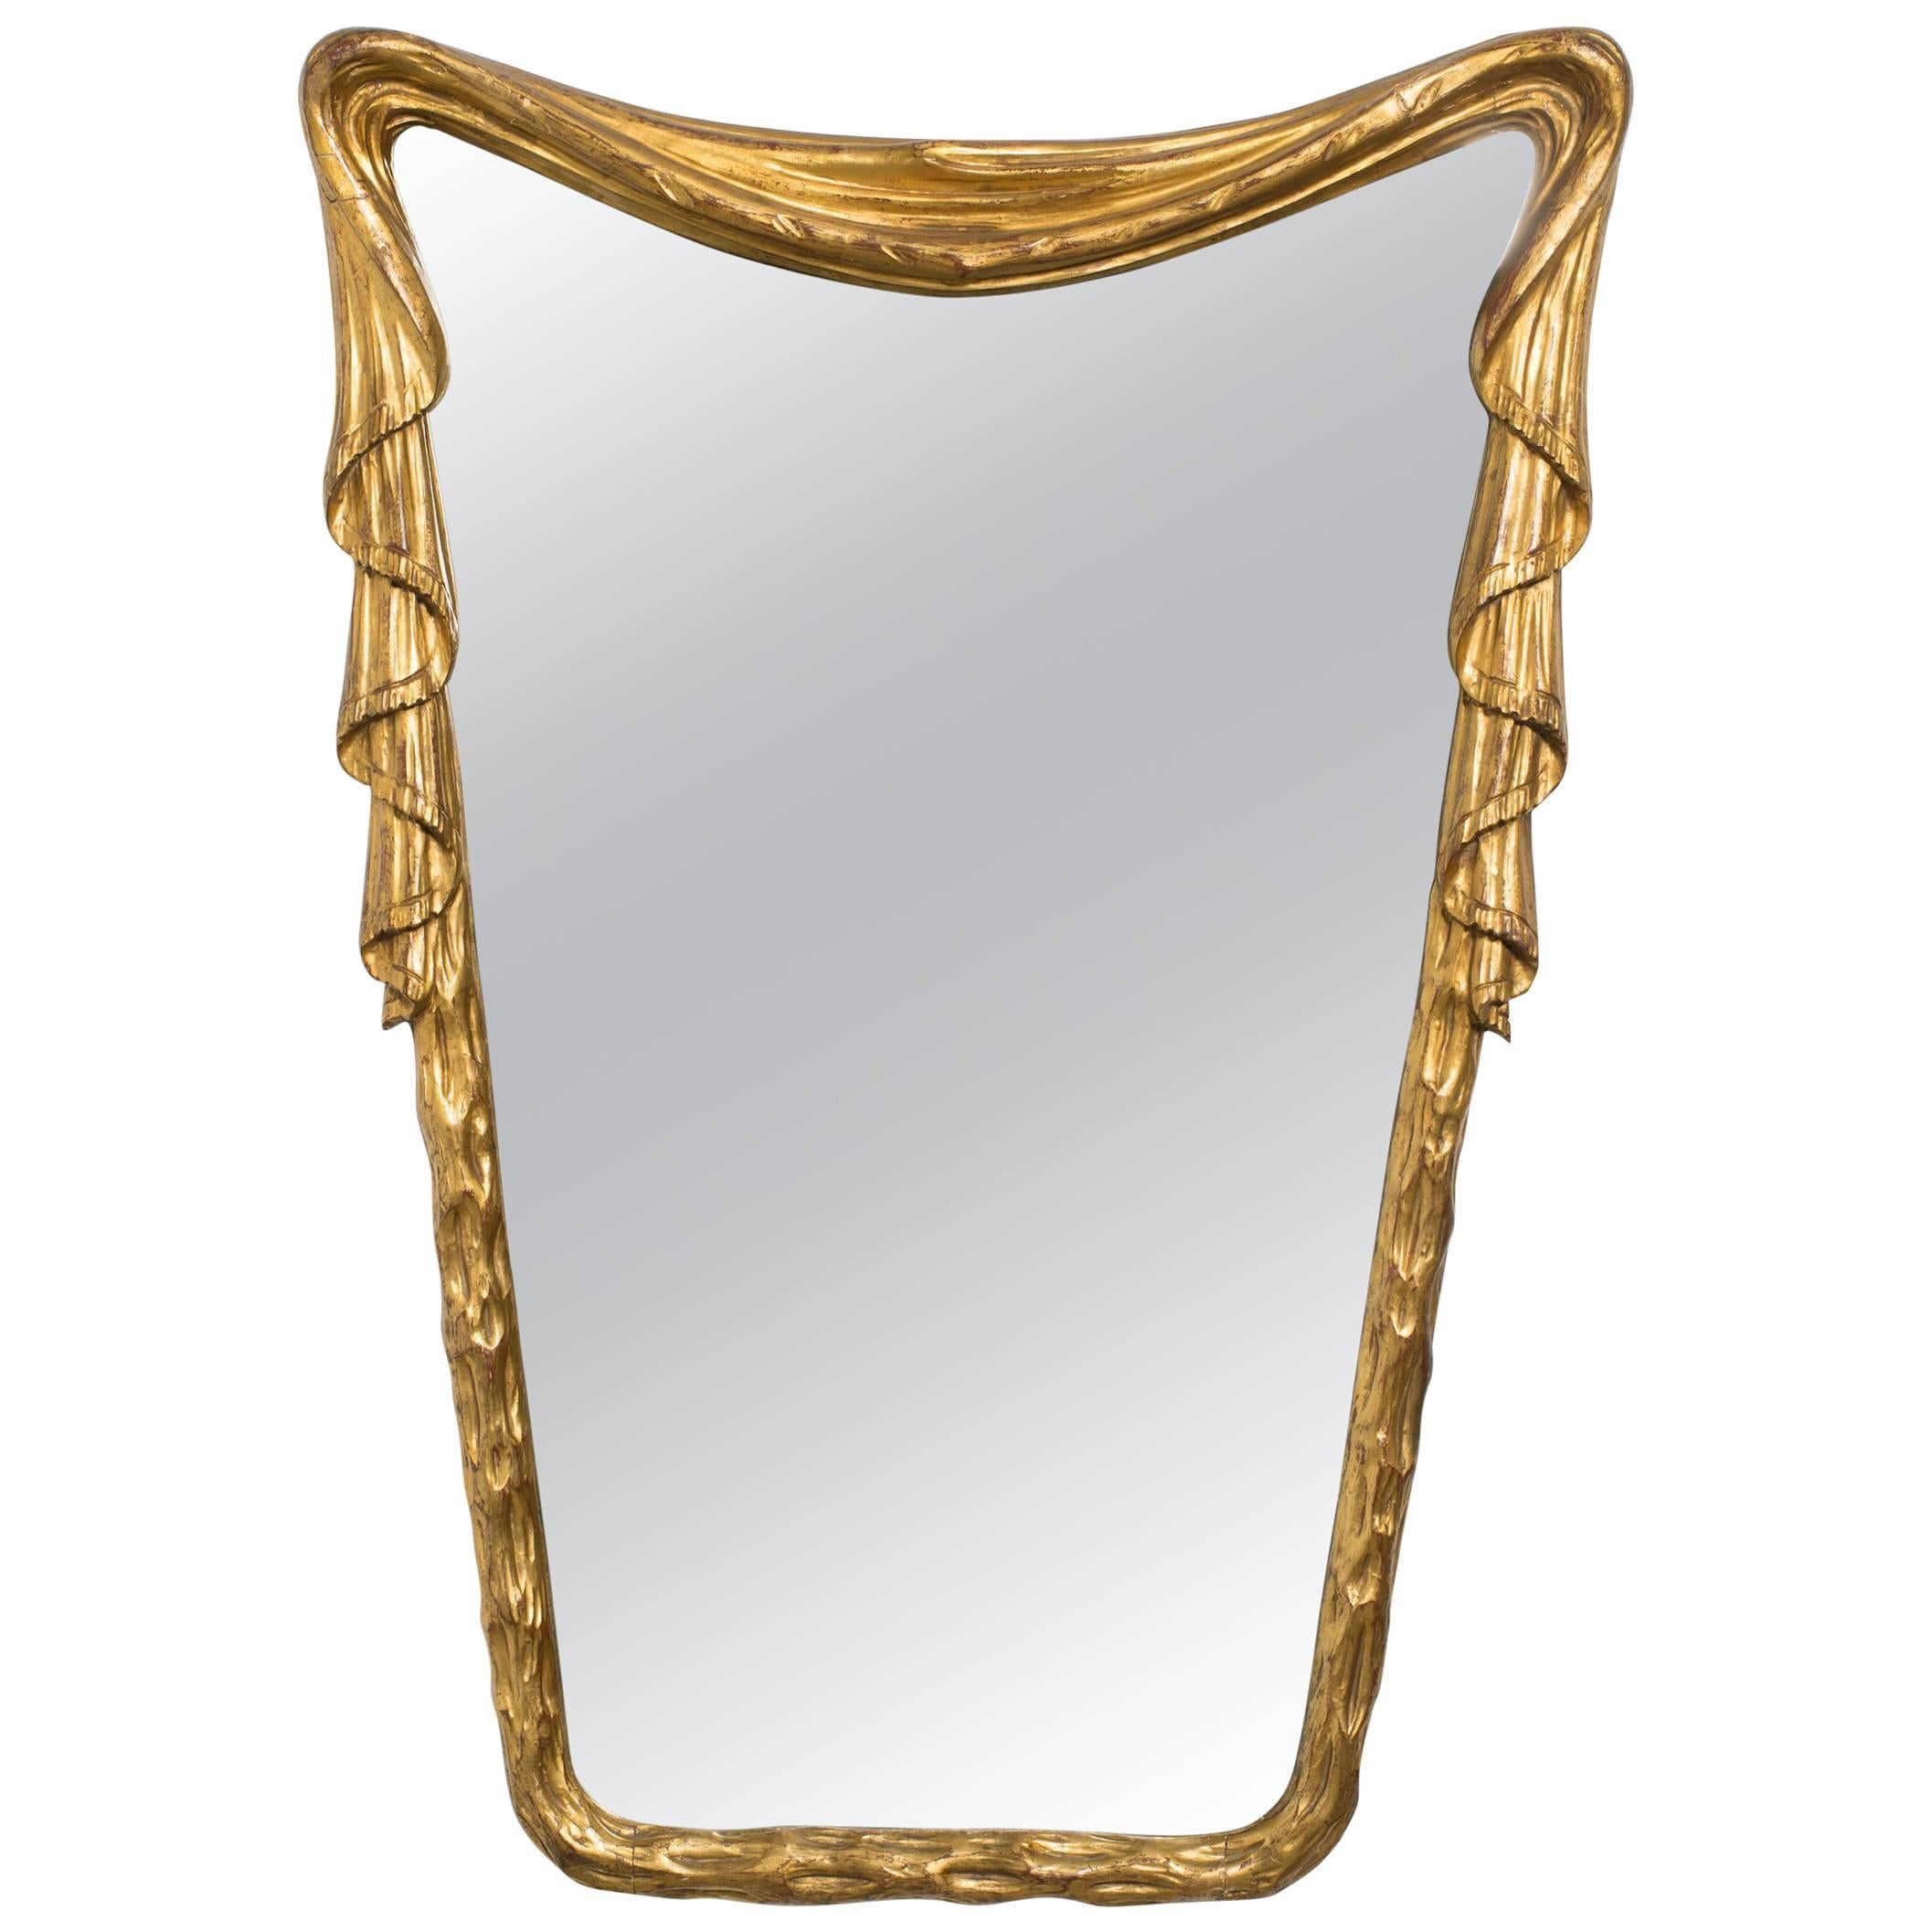 1940s Hollywood Regency Carved Wood Draped Mirror from Italy